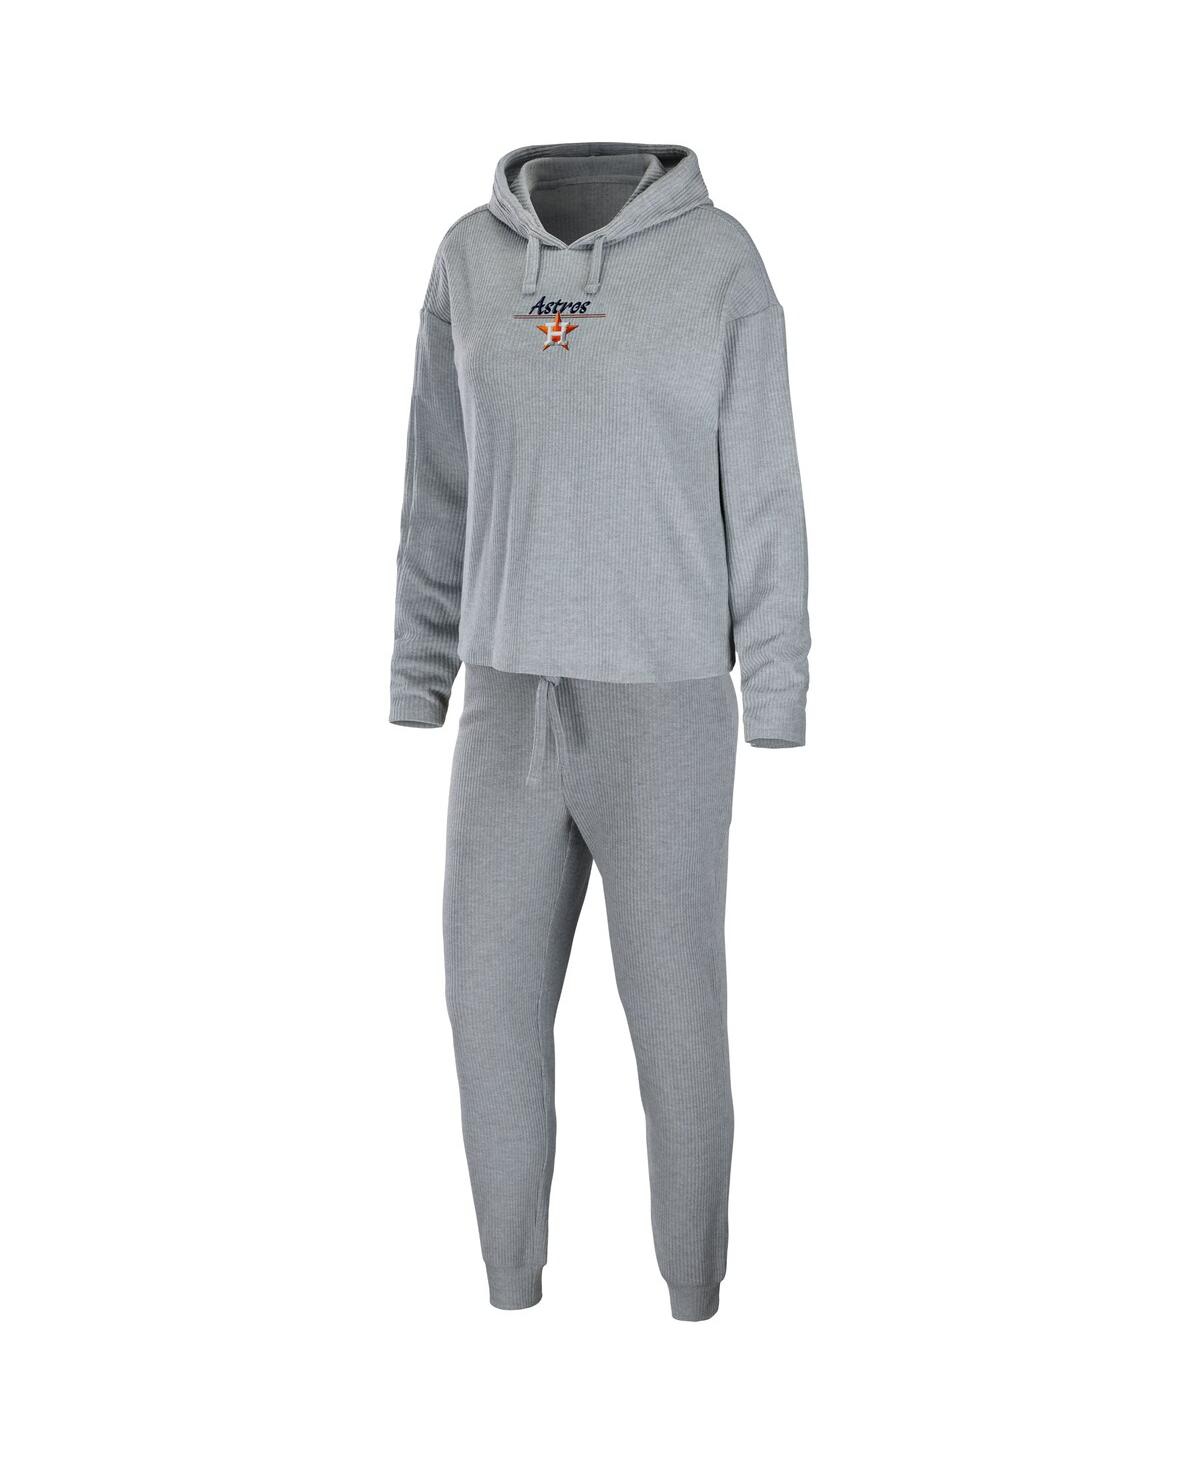 Wear By Erin Andrews Women's  Heather Gray Houston Astros Logo Pullover Hoodie And Pants Sleep Set